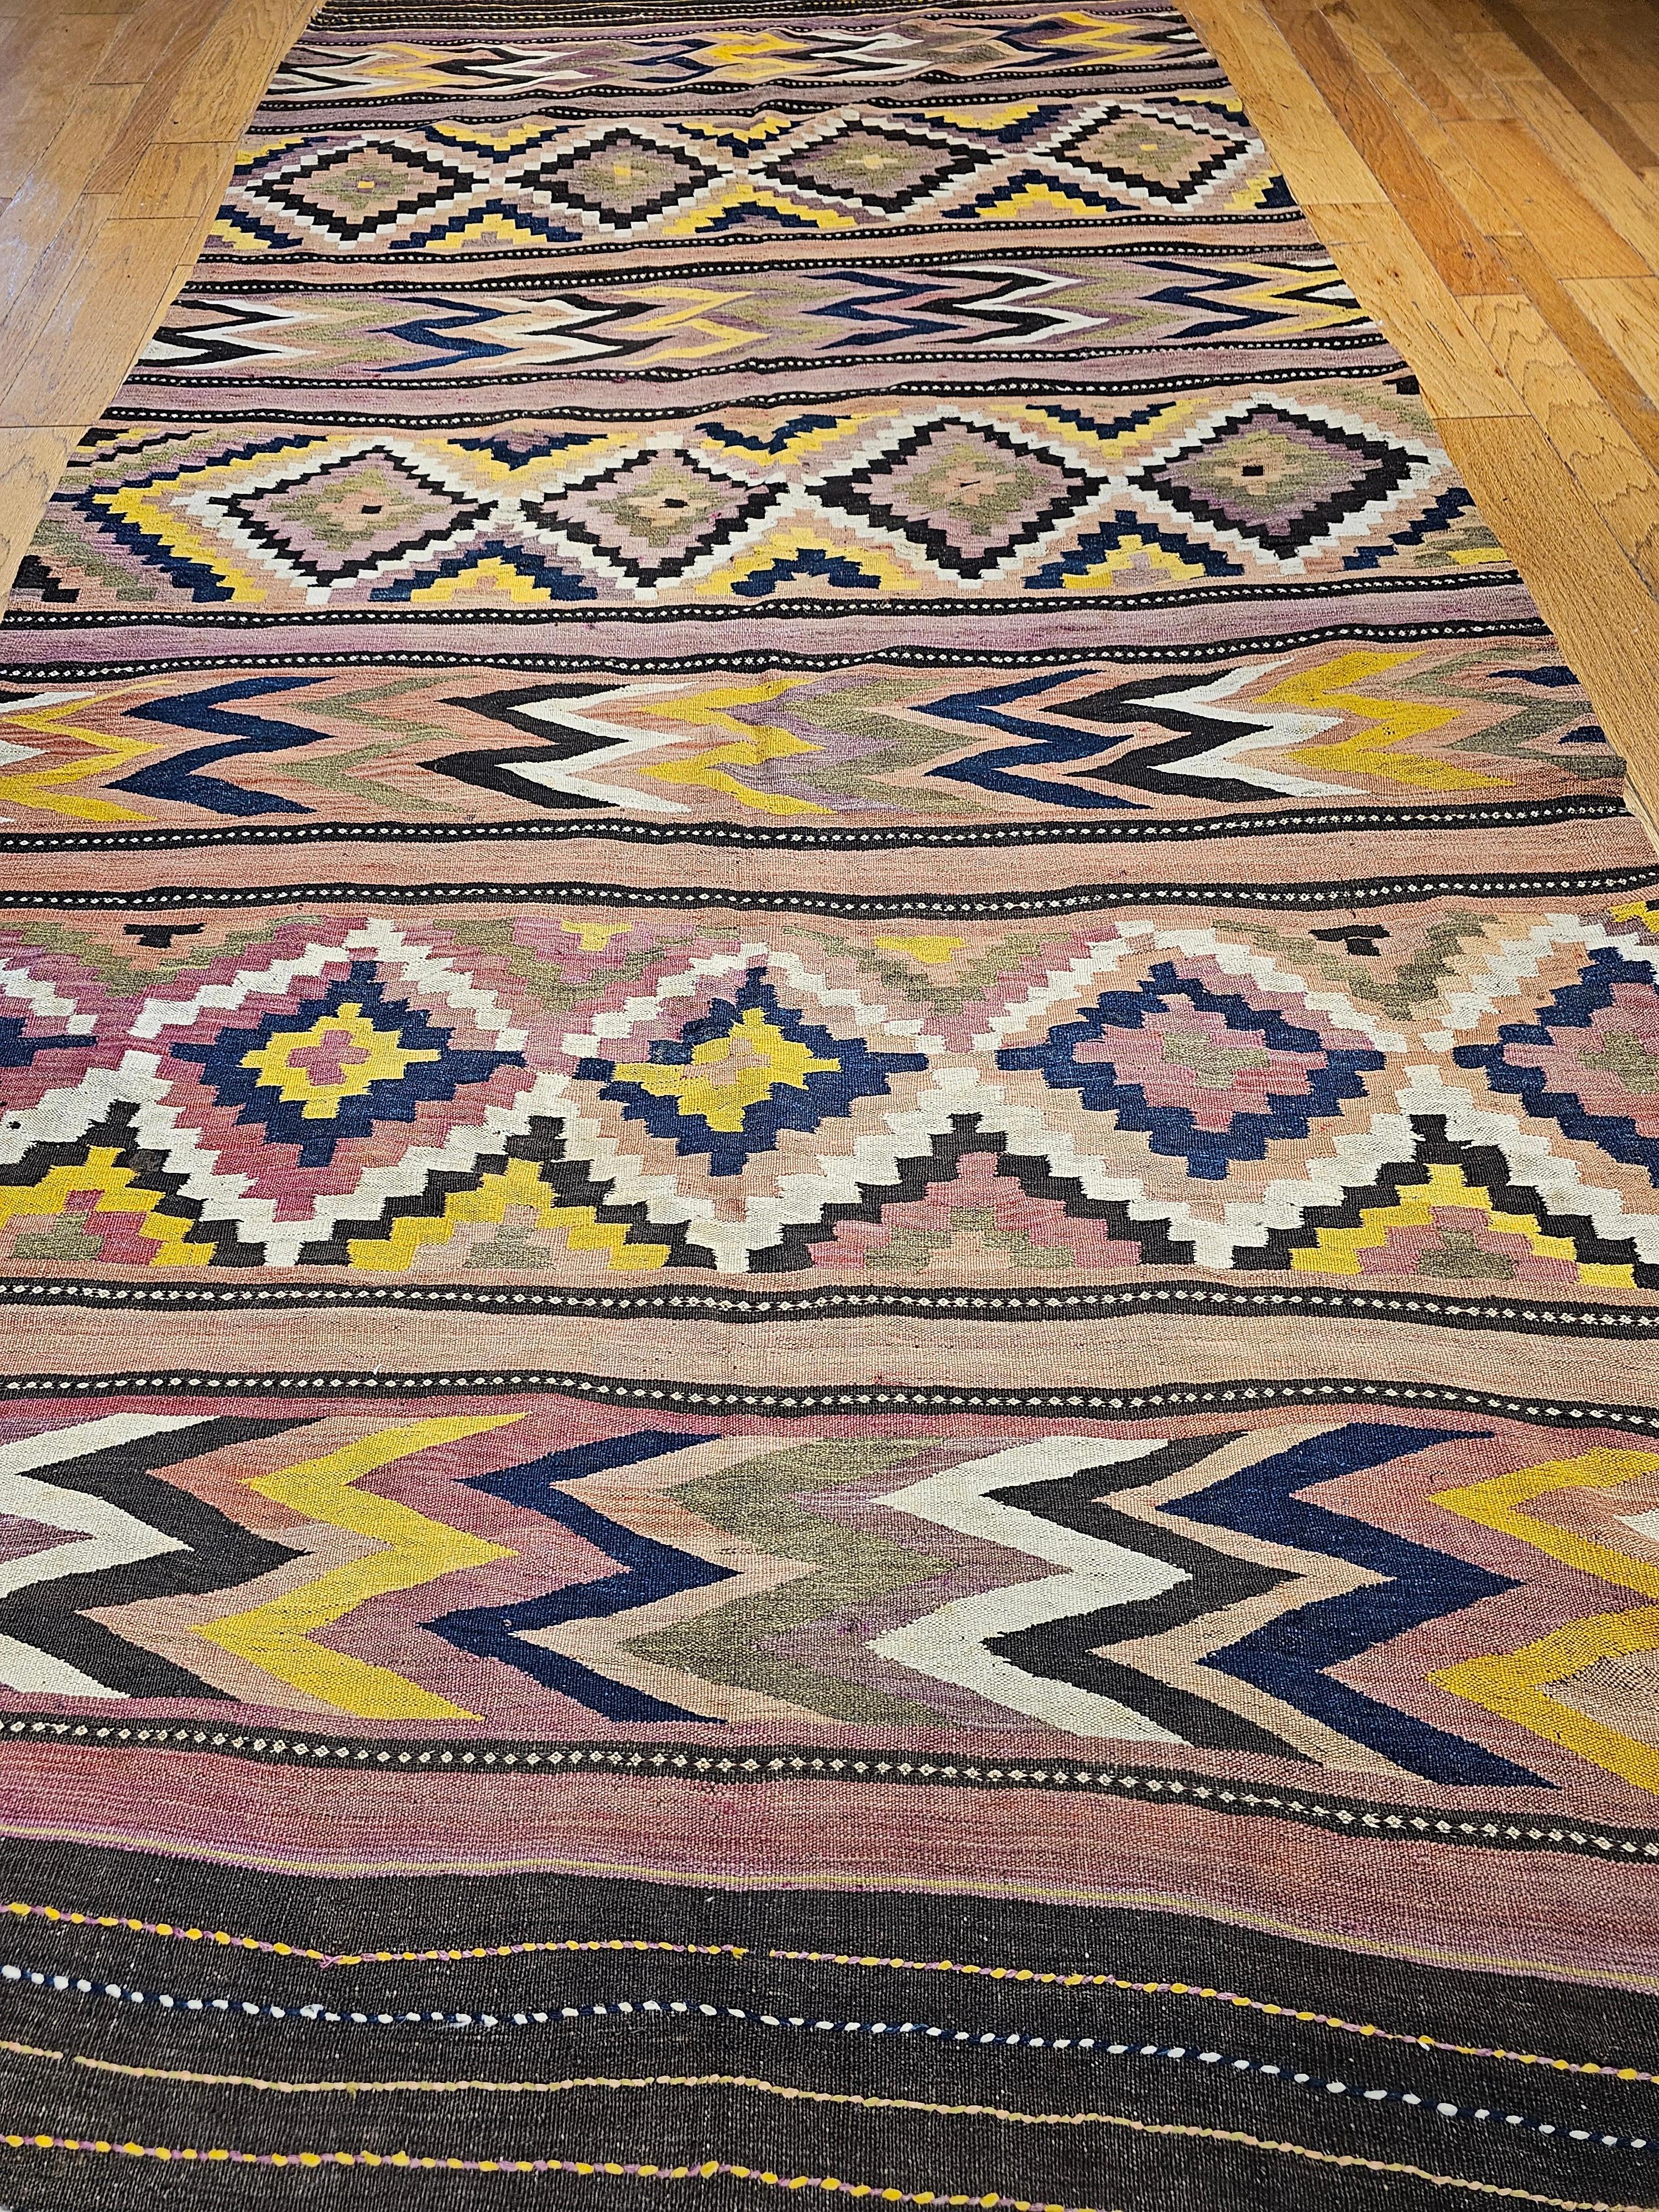 An oversized vintage Moroccan kilim “gallery/corridor” rug from the mid 1900s.  Beautiful geometric designs with wonderful colors in green, purple, yellow, brown, blue, and other shades.   The size of the rug makes it ideal either as a gallery or